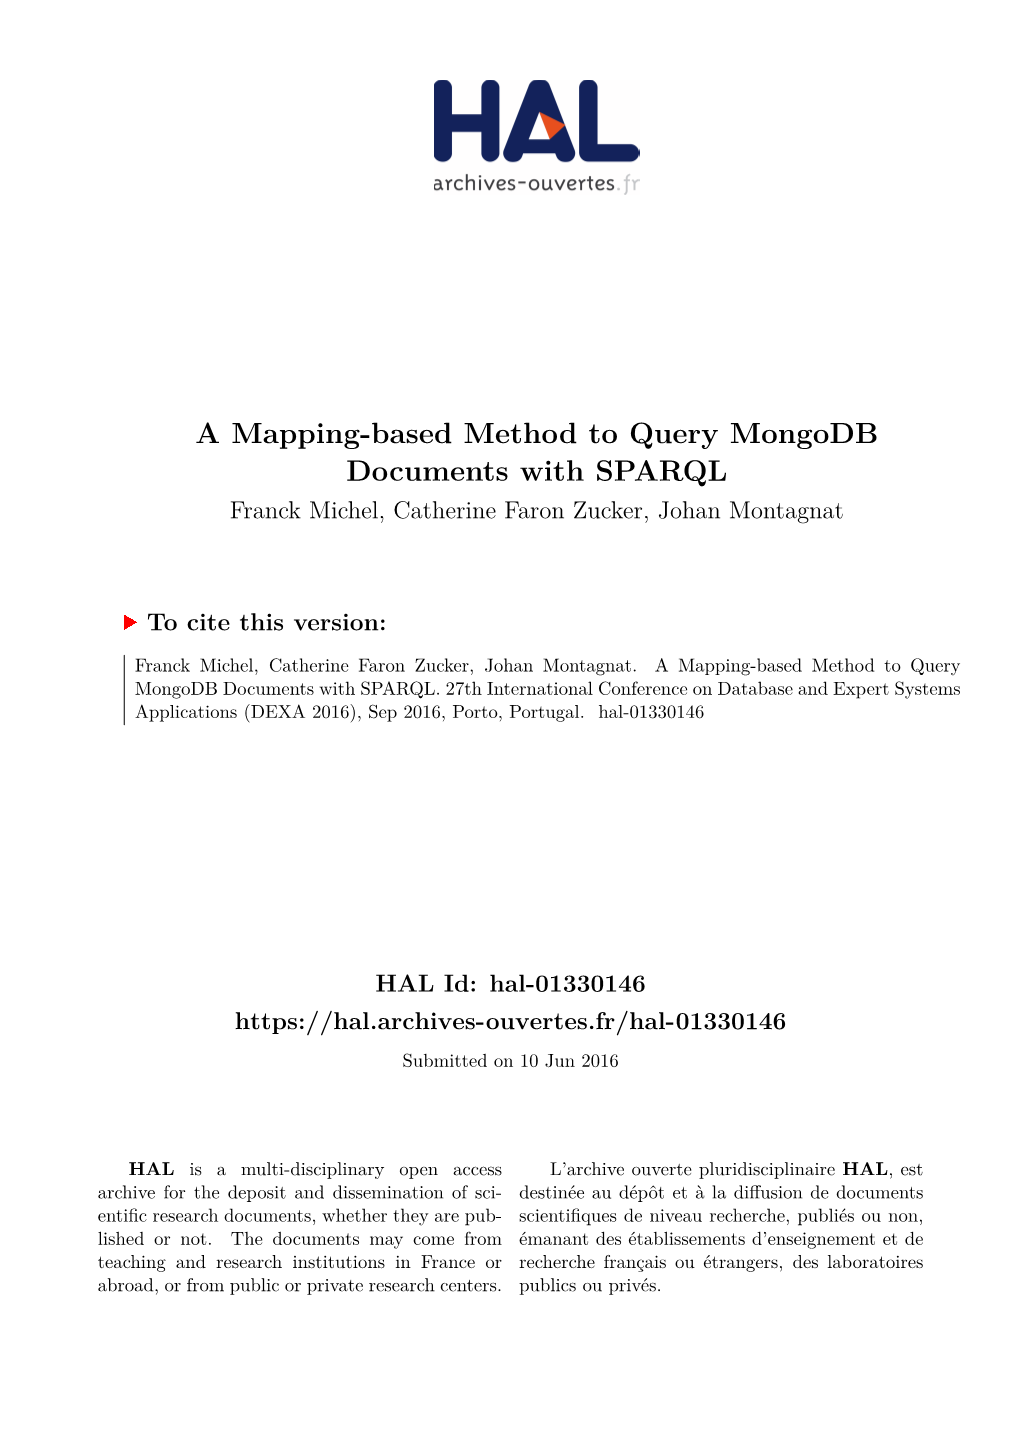 A Mapping-Based Method to Query Mongodb Documents with SPARQL Franck Michel, Catherine Faron Zucker, Johan Montagnat